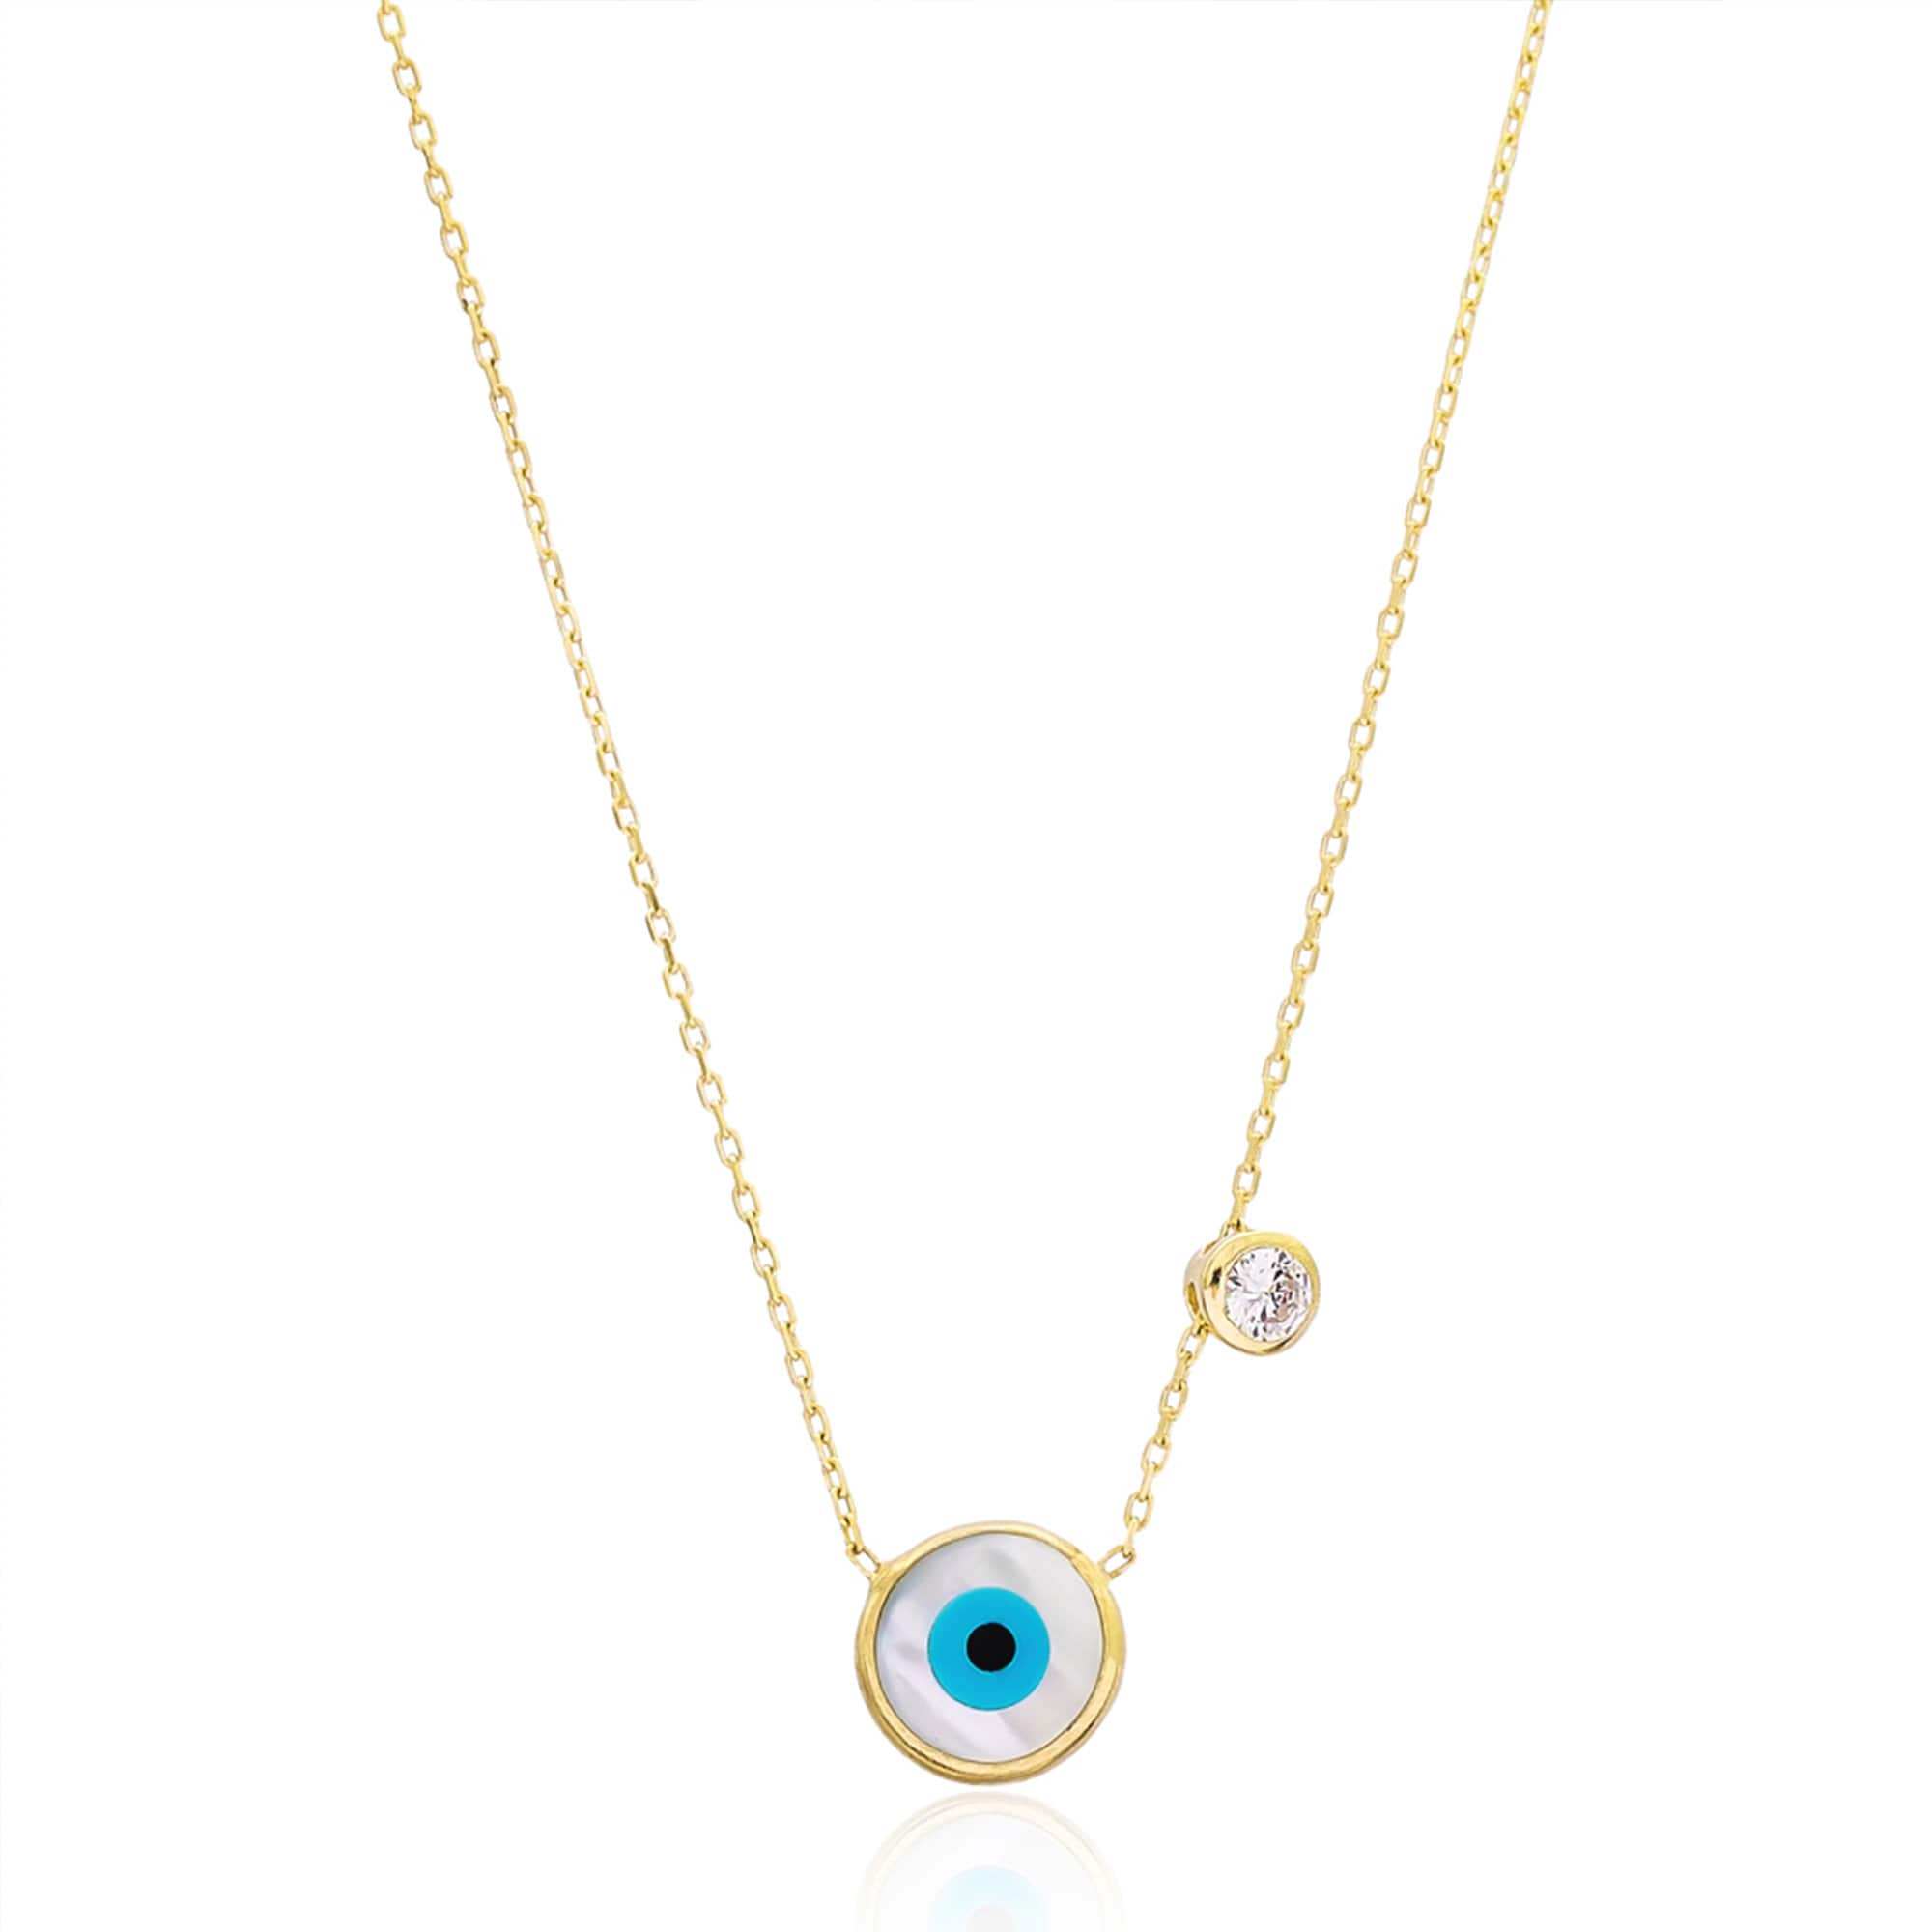 White Evil Eye Necklace with Sliding Cubic Zirconia Stone  - 925 Sterling Silver